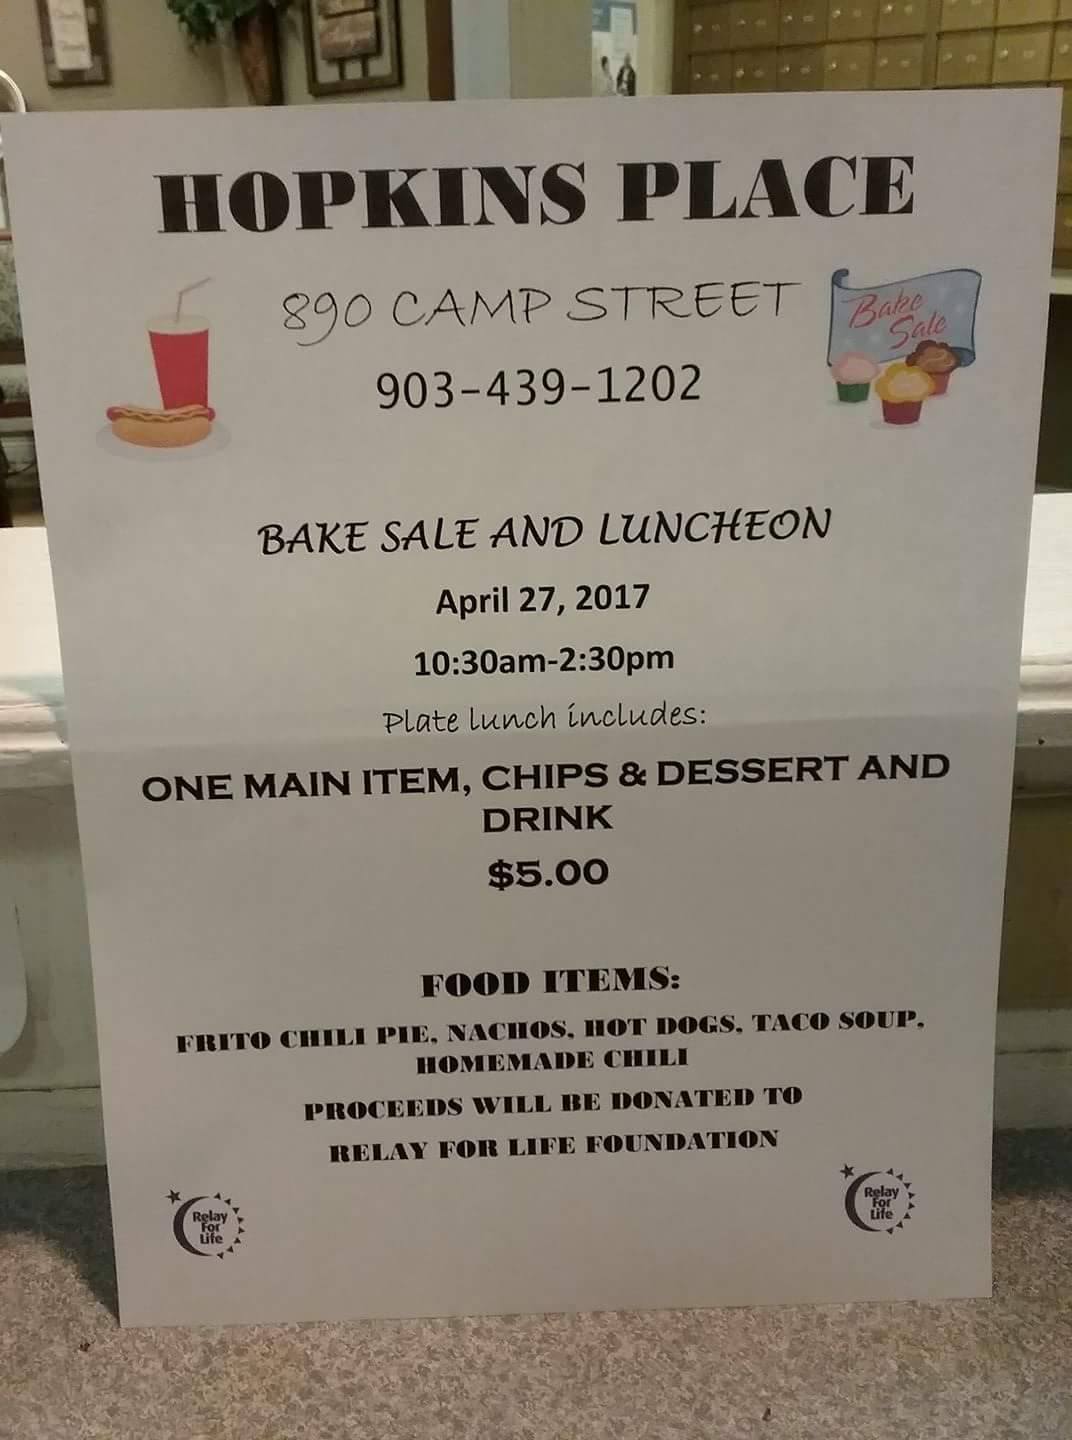 Hopkins Place Bake Sale and Luncheon to Benefit Relay for Life on April 27th